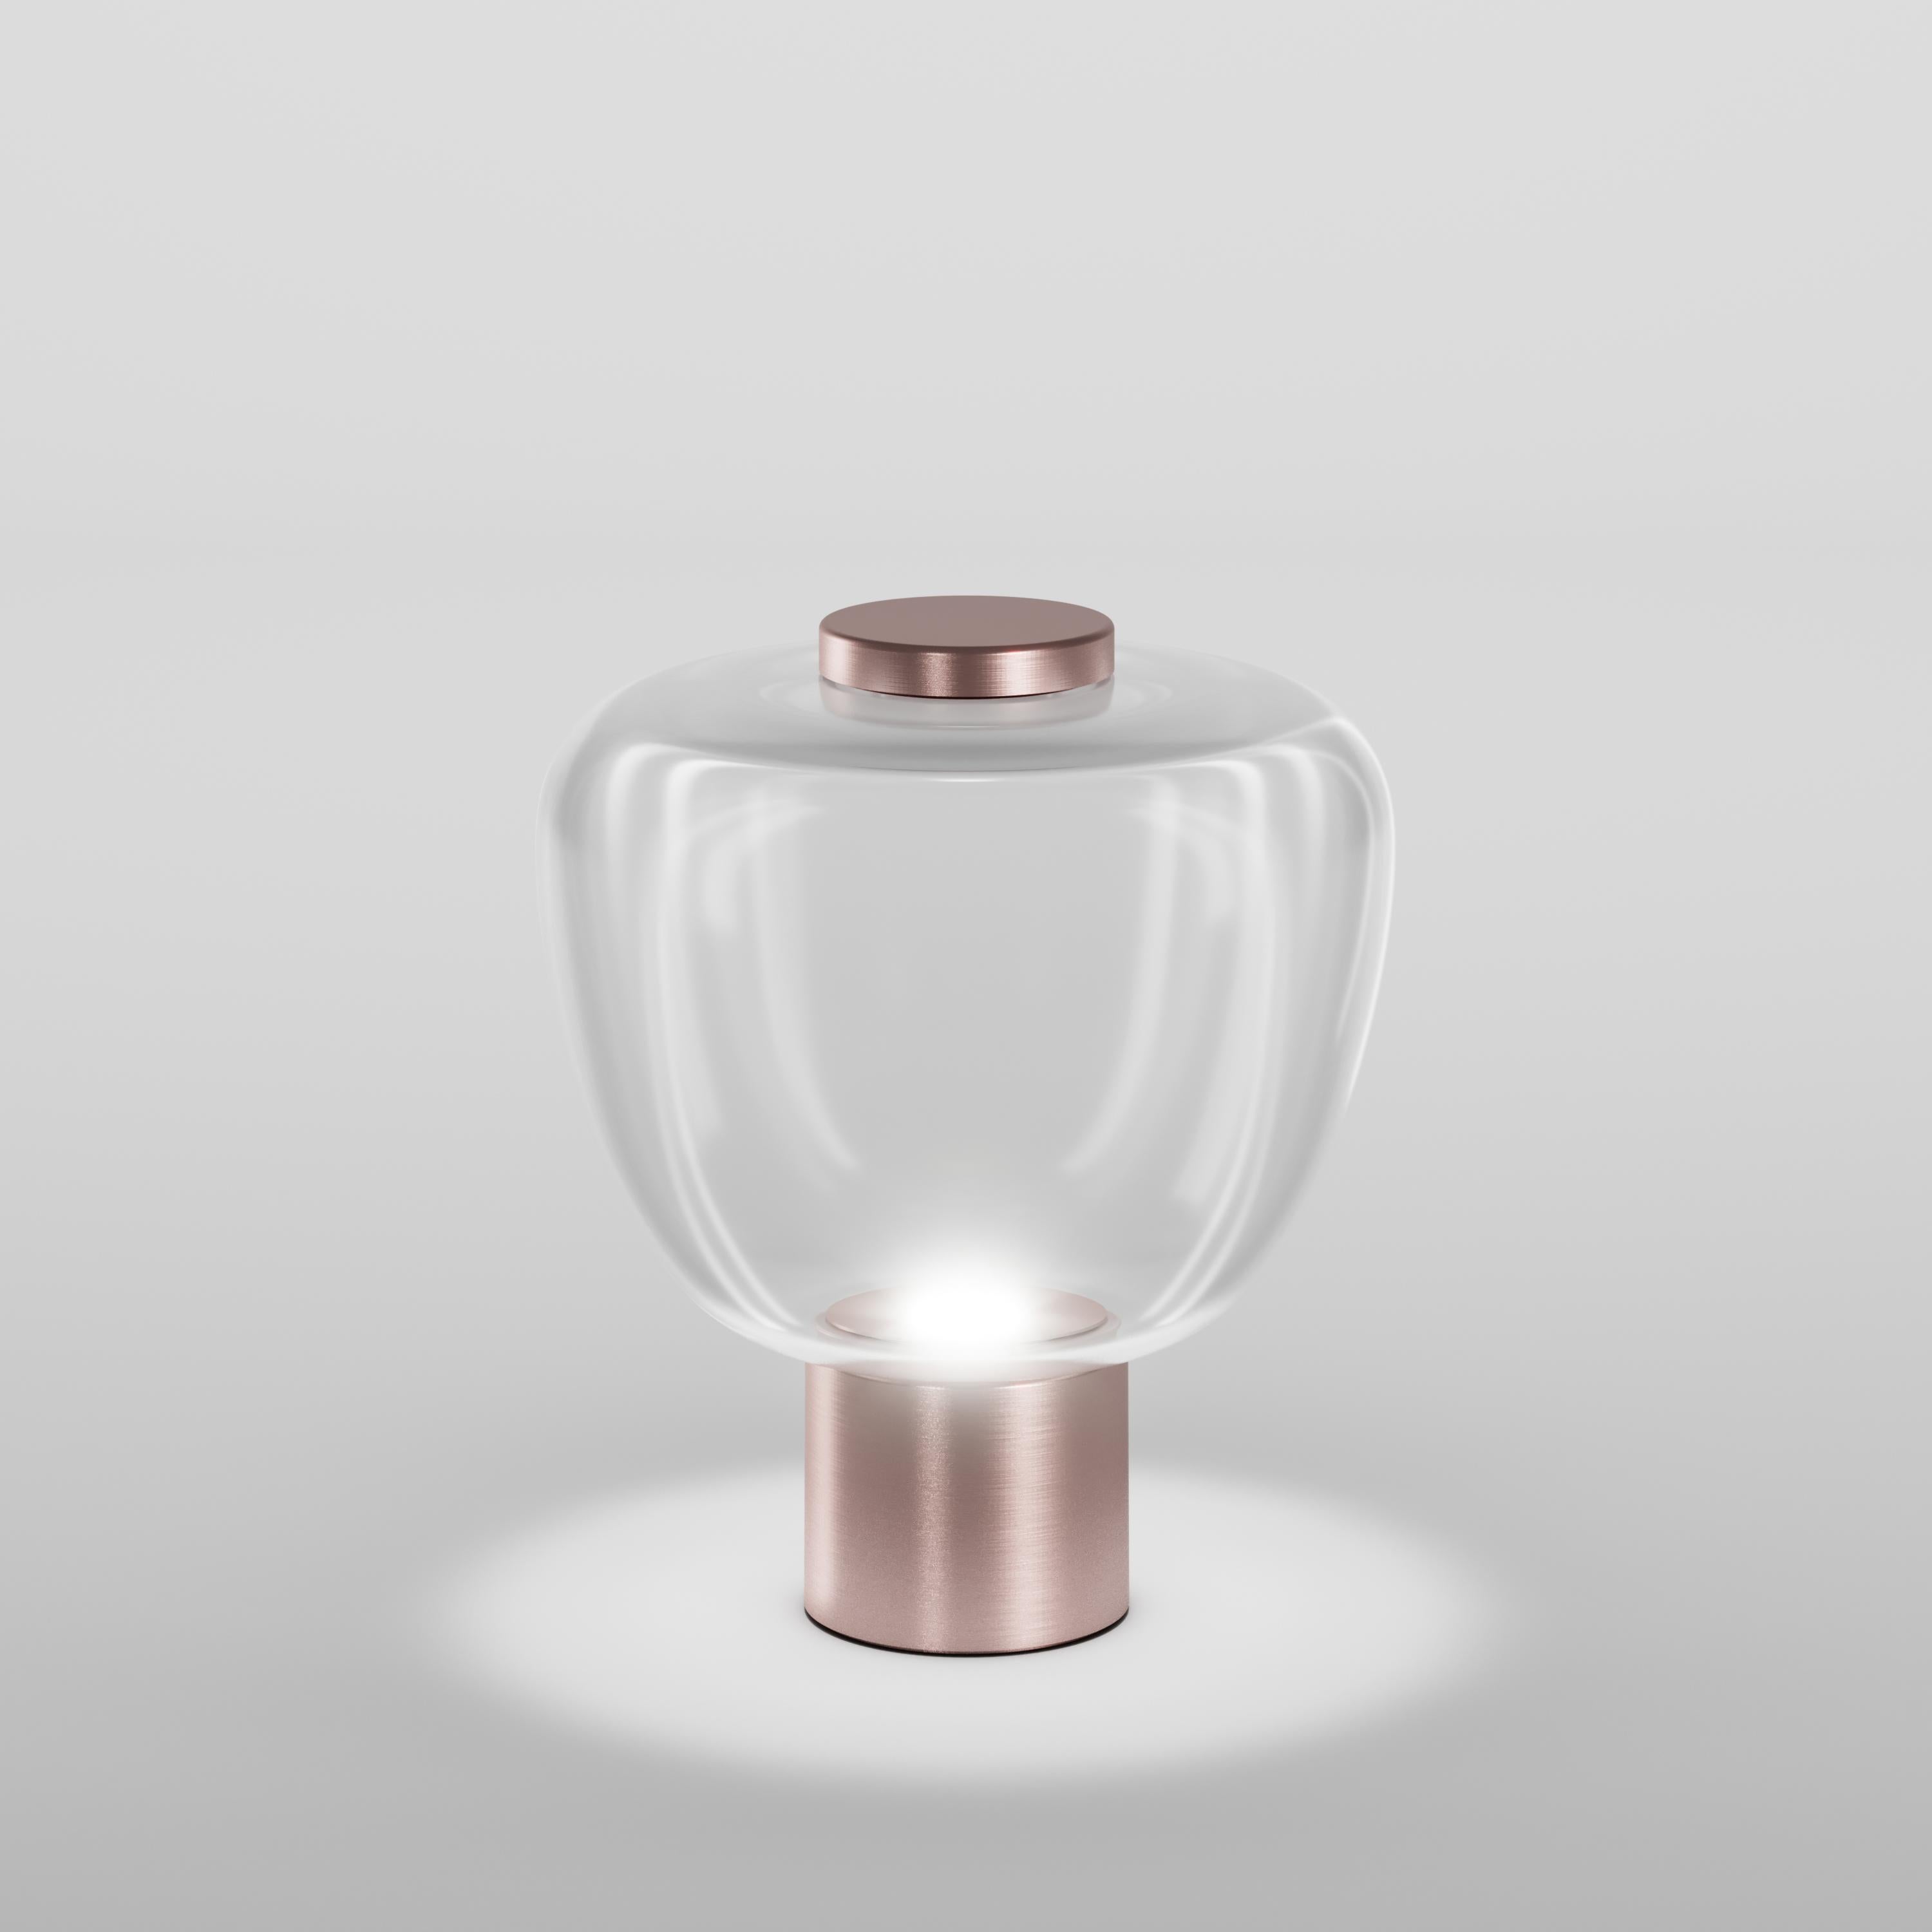 In the Riflesso collection the simplicity and lightness of glass become the main features with three different sinuous shapes. The silhouettes of the diffuser are enhanced by the LED light source.

Specifications:
Material: Glass
Light source: